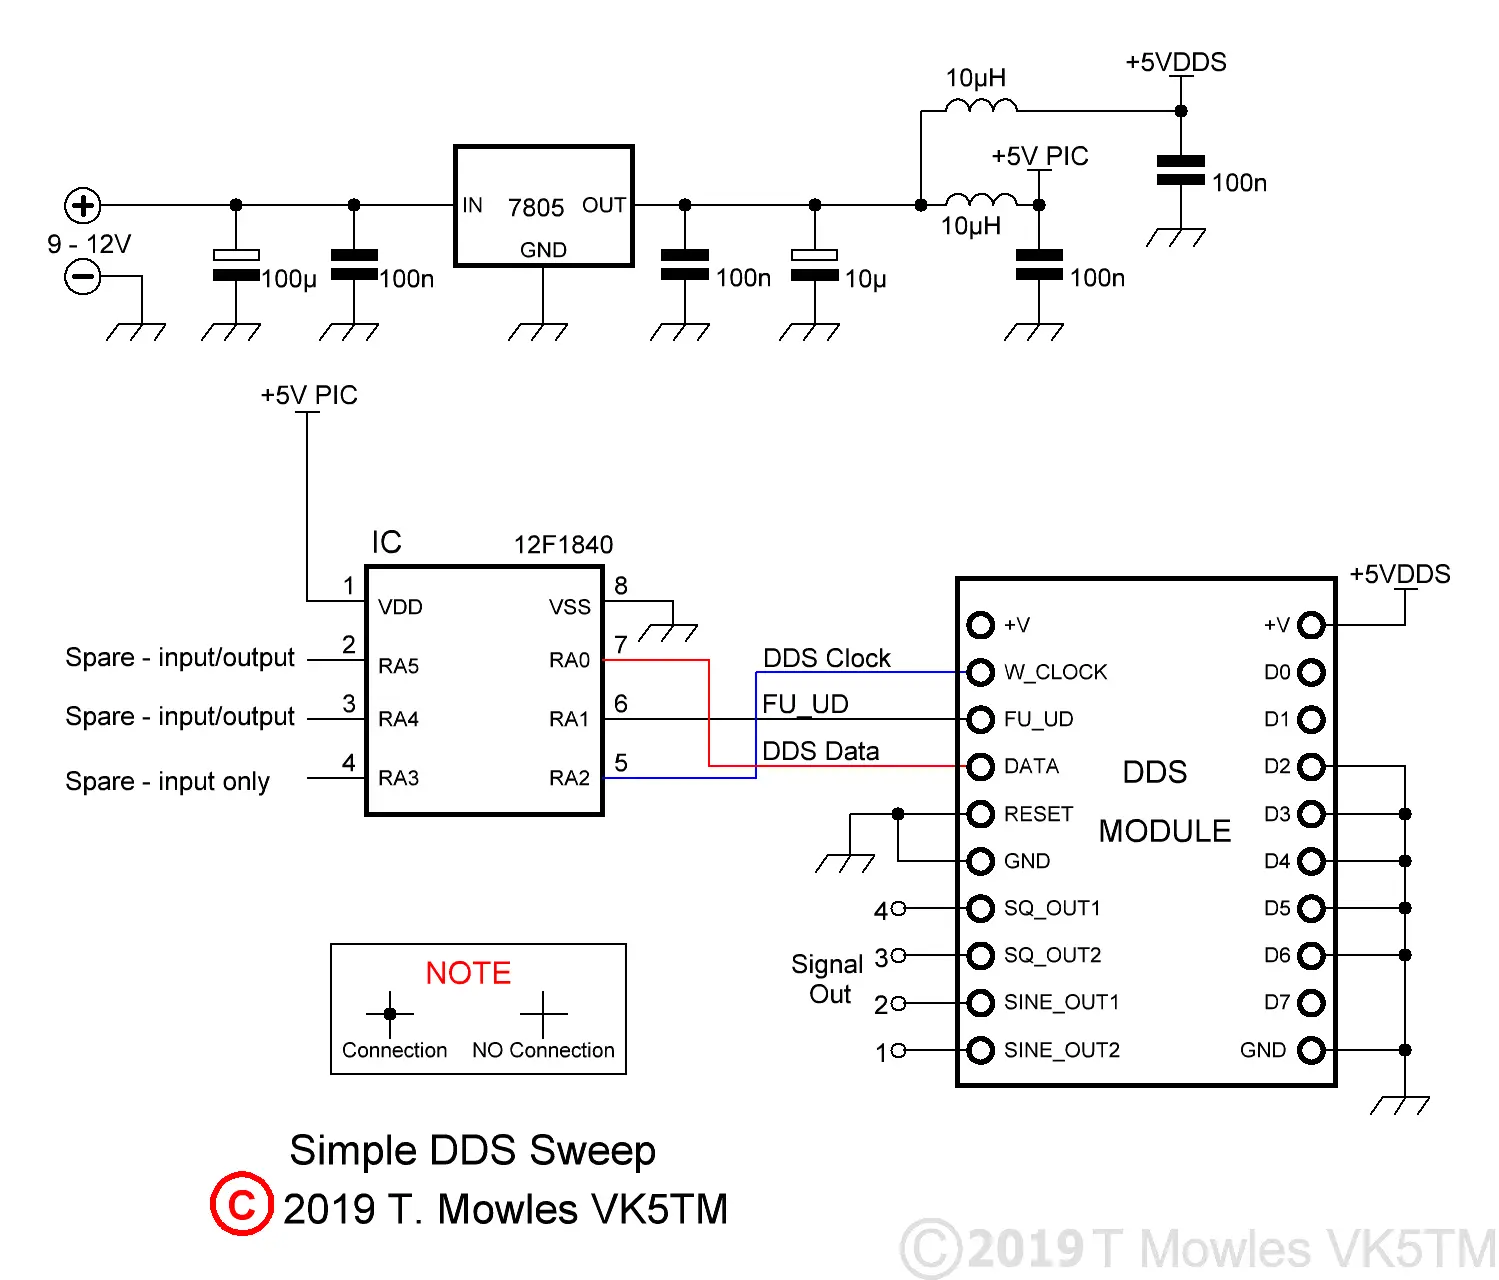 Simple DDS sweeper schematic